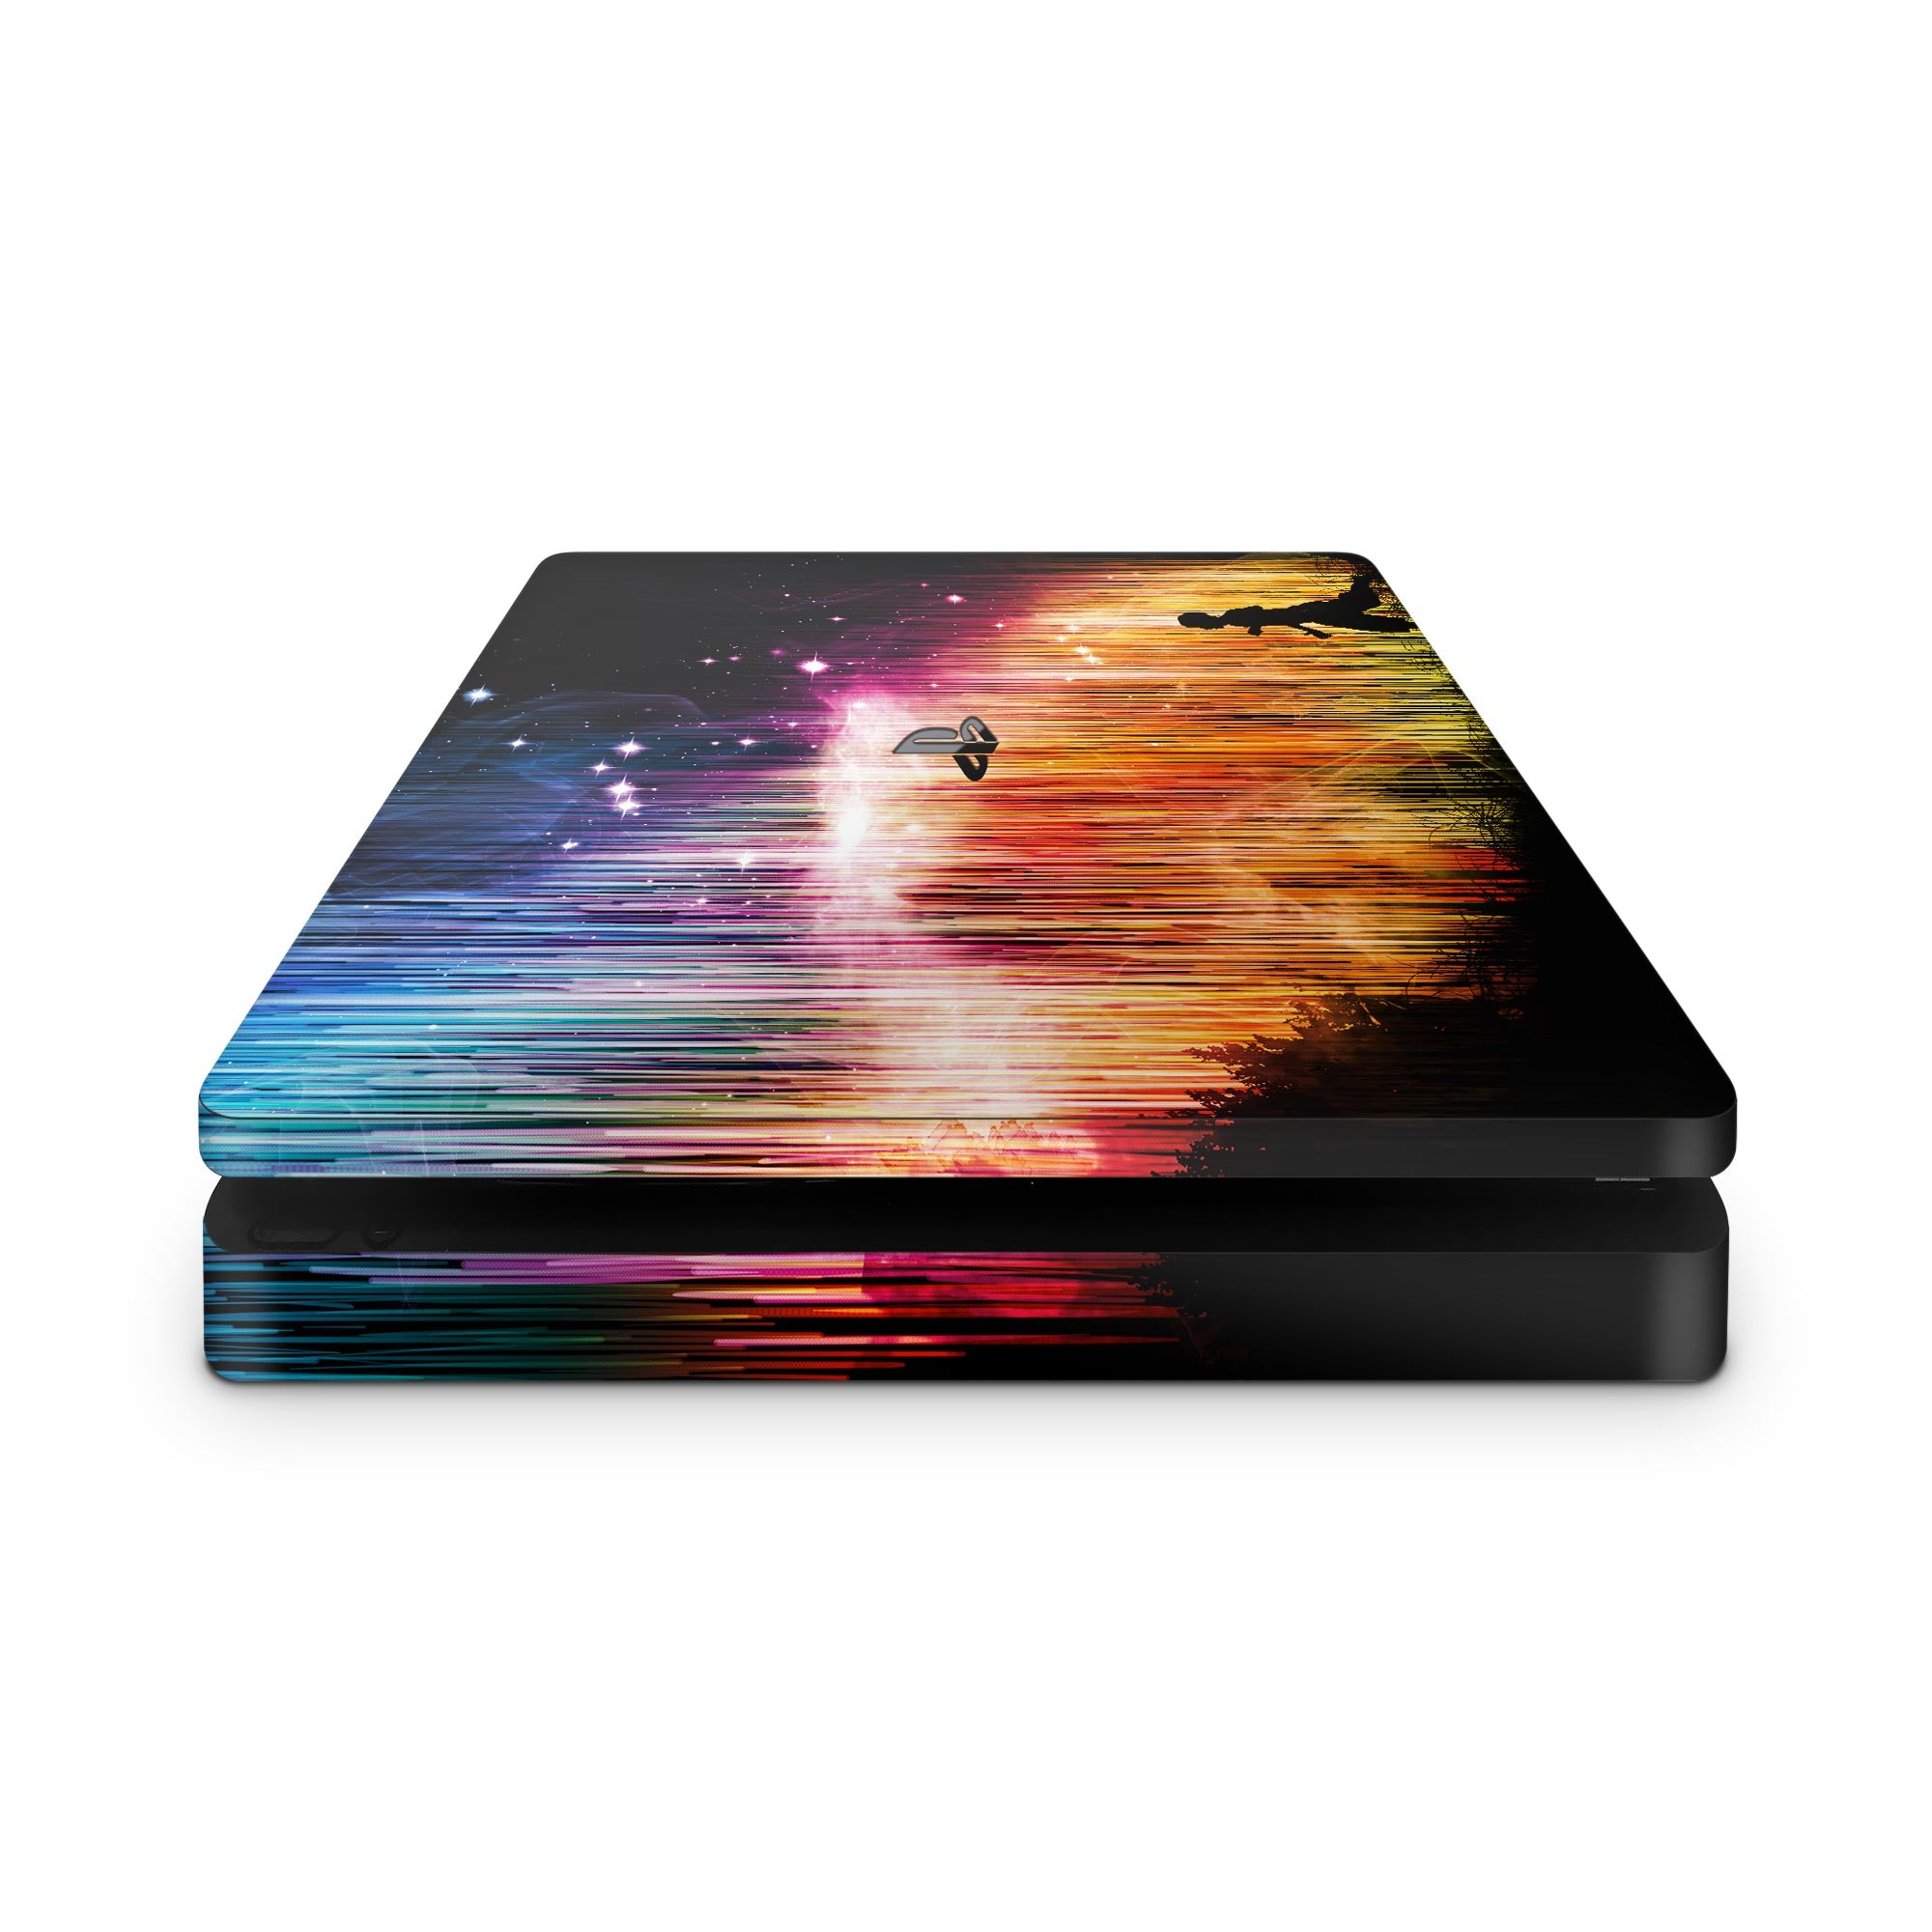 northern lights console wrap for ps4 slim